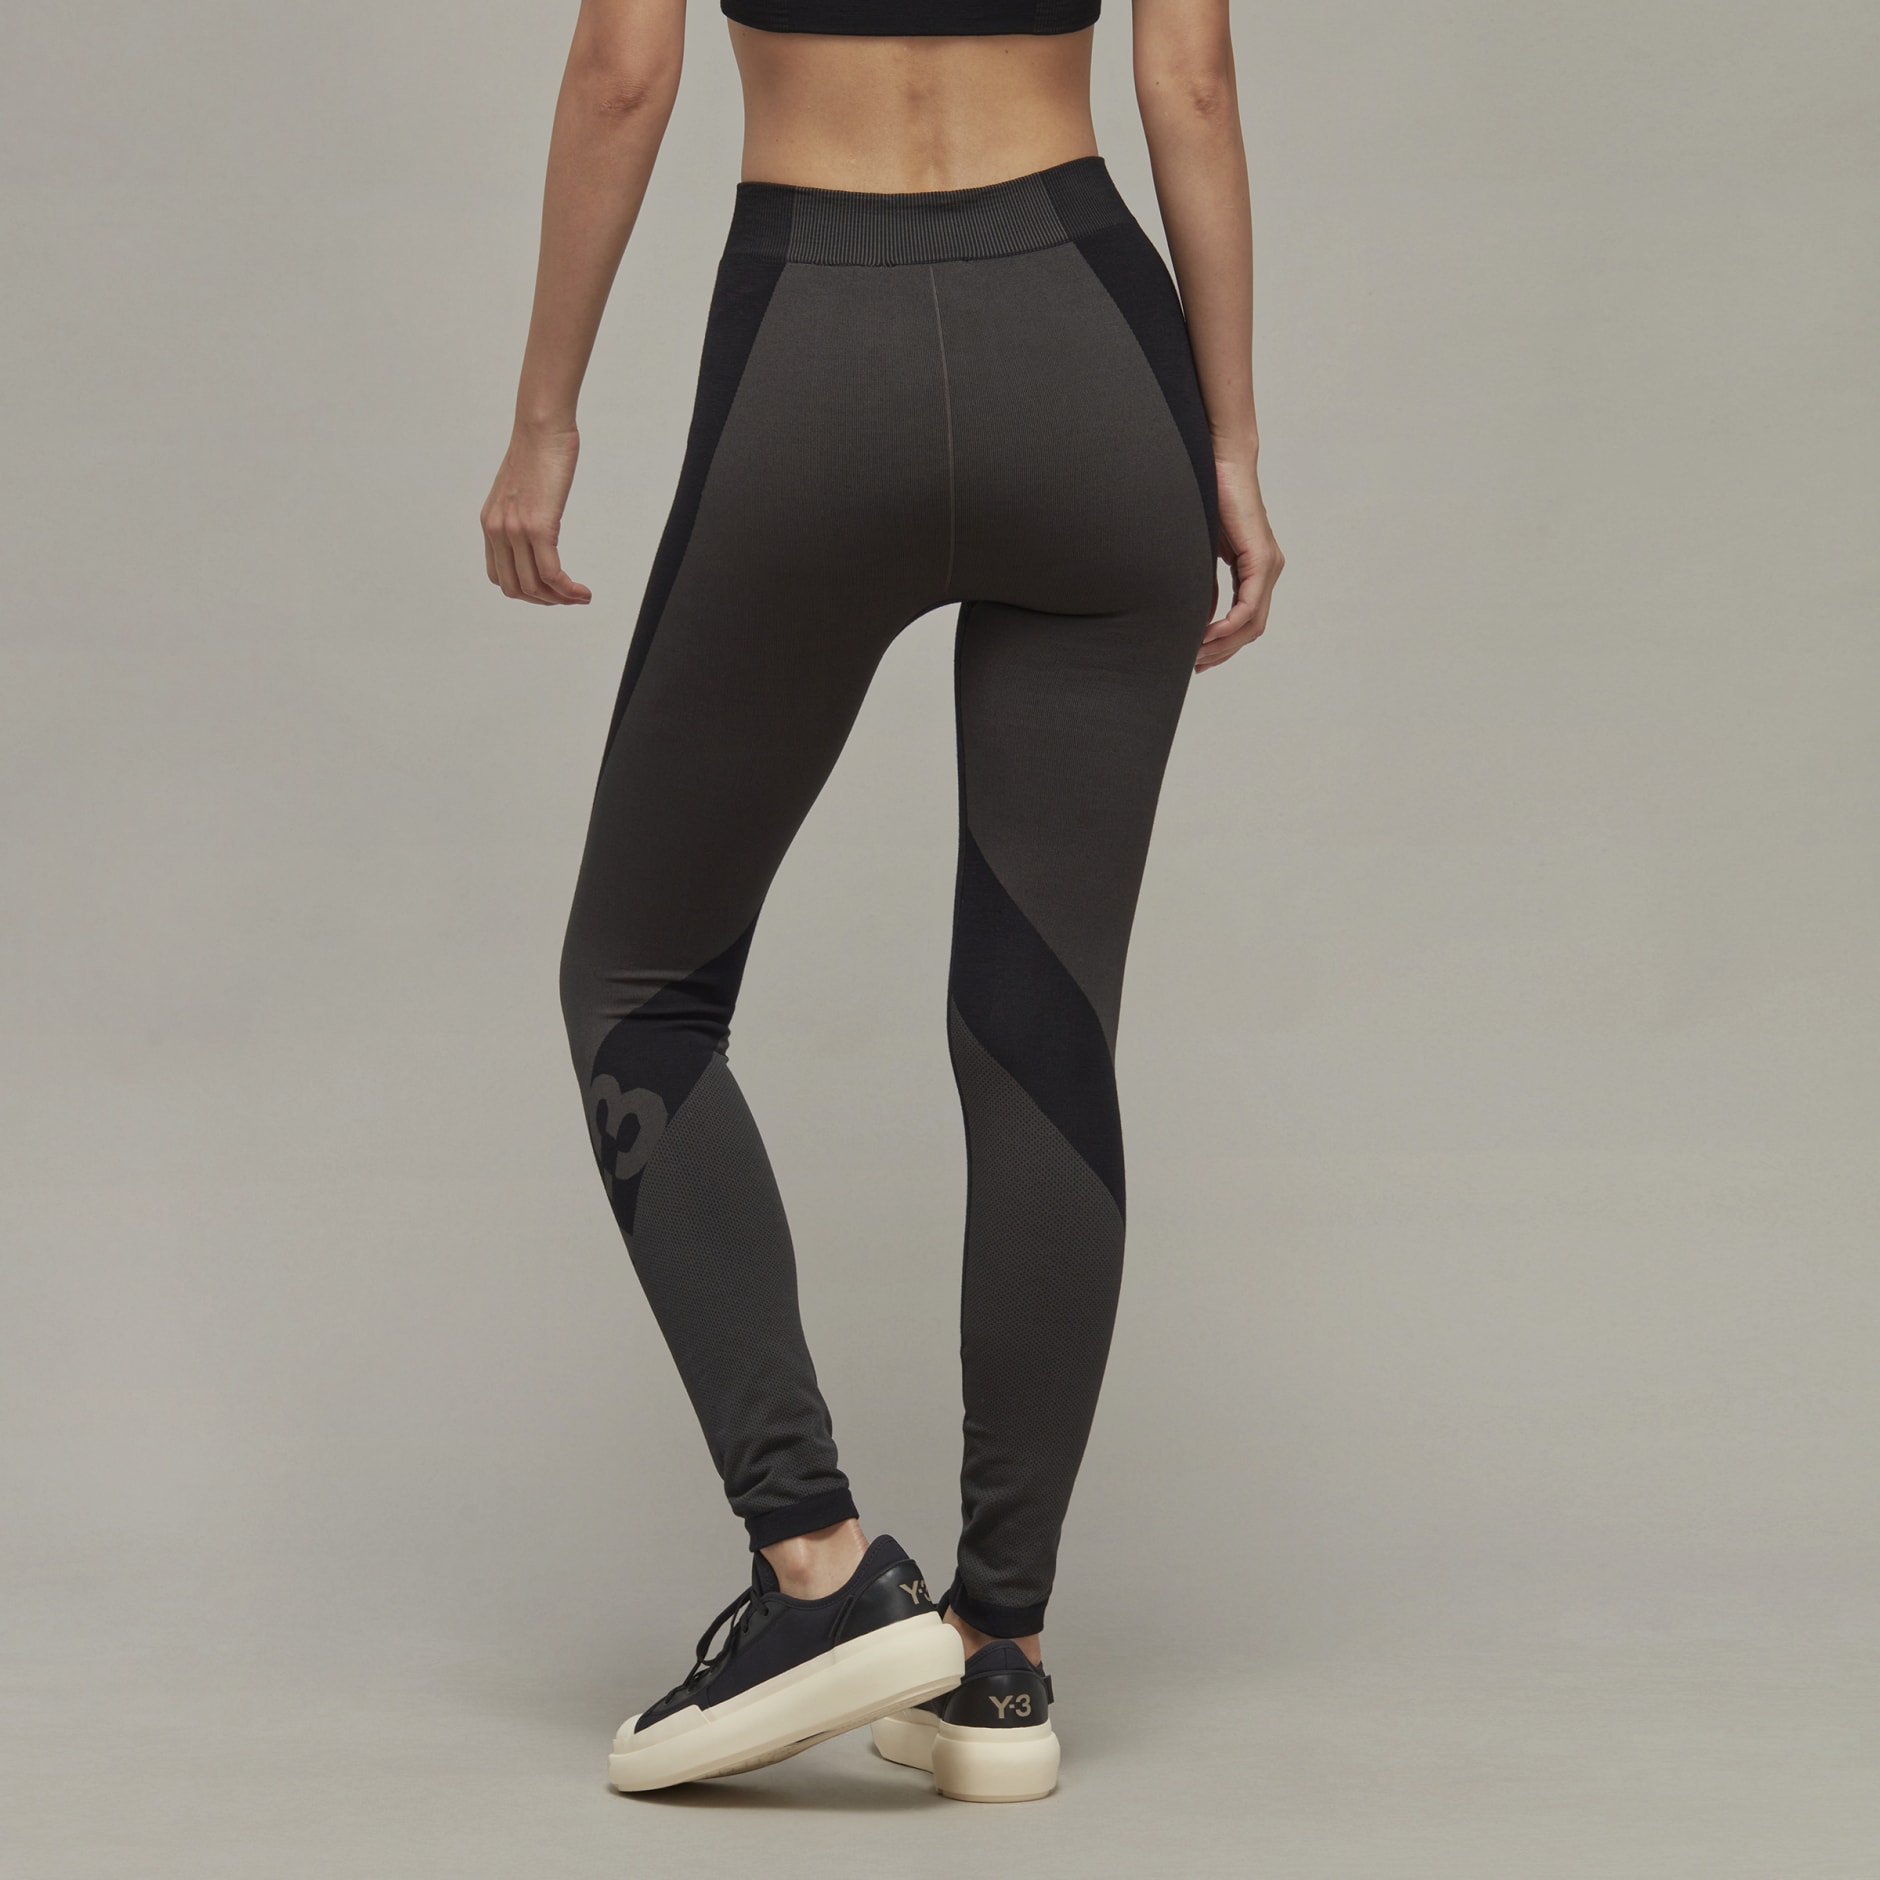 Clothing - Y-3 Classic Seamless Knit Tights - Black